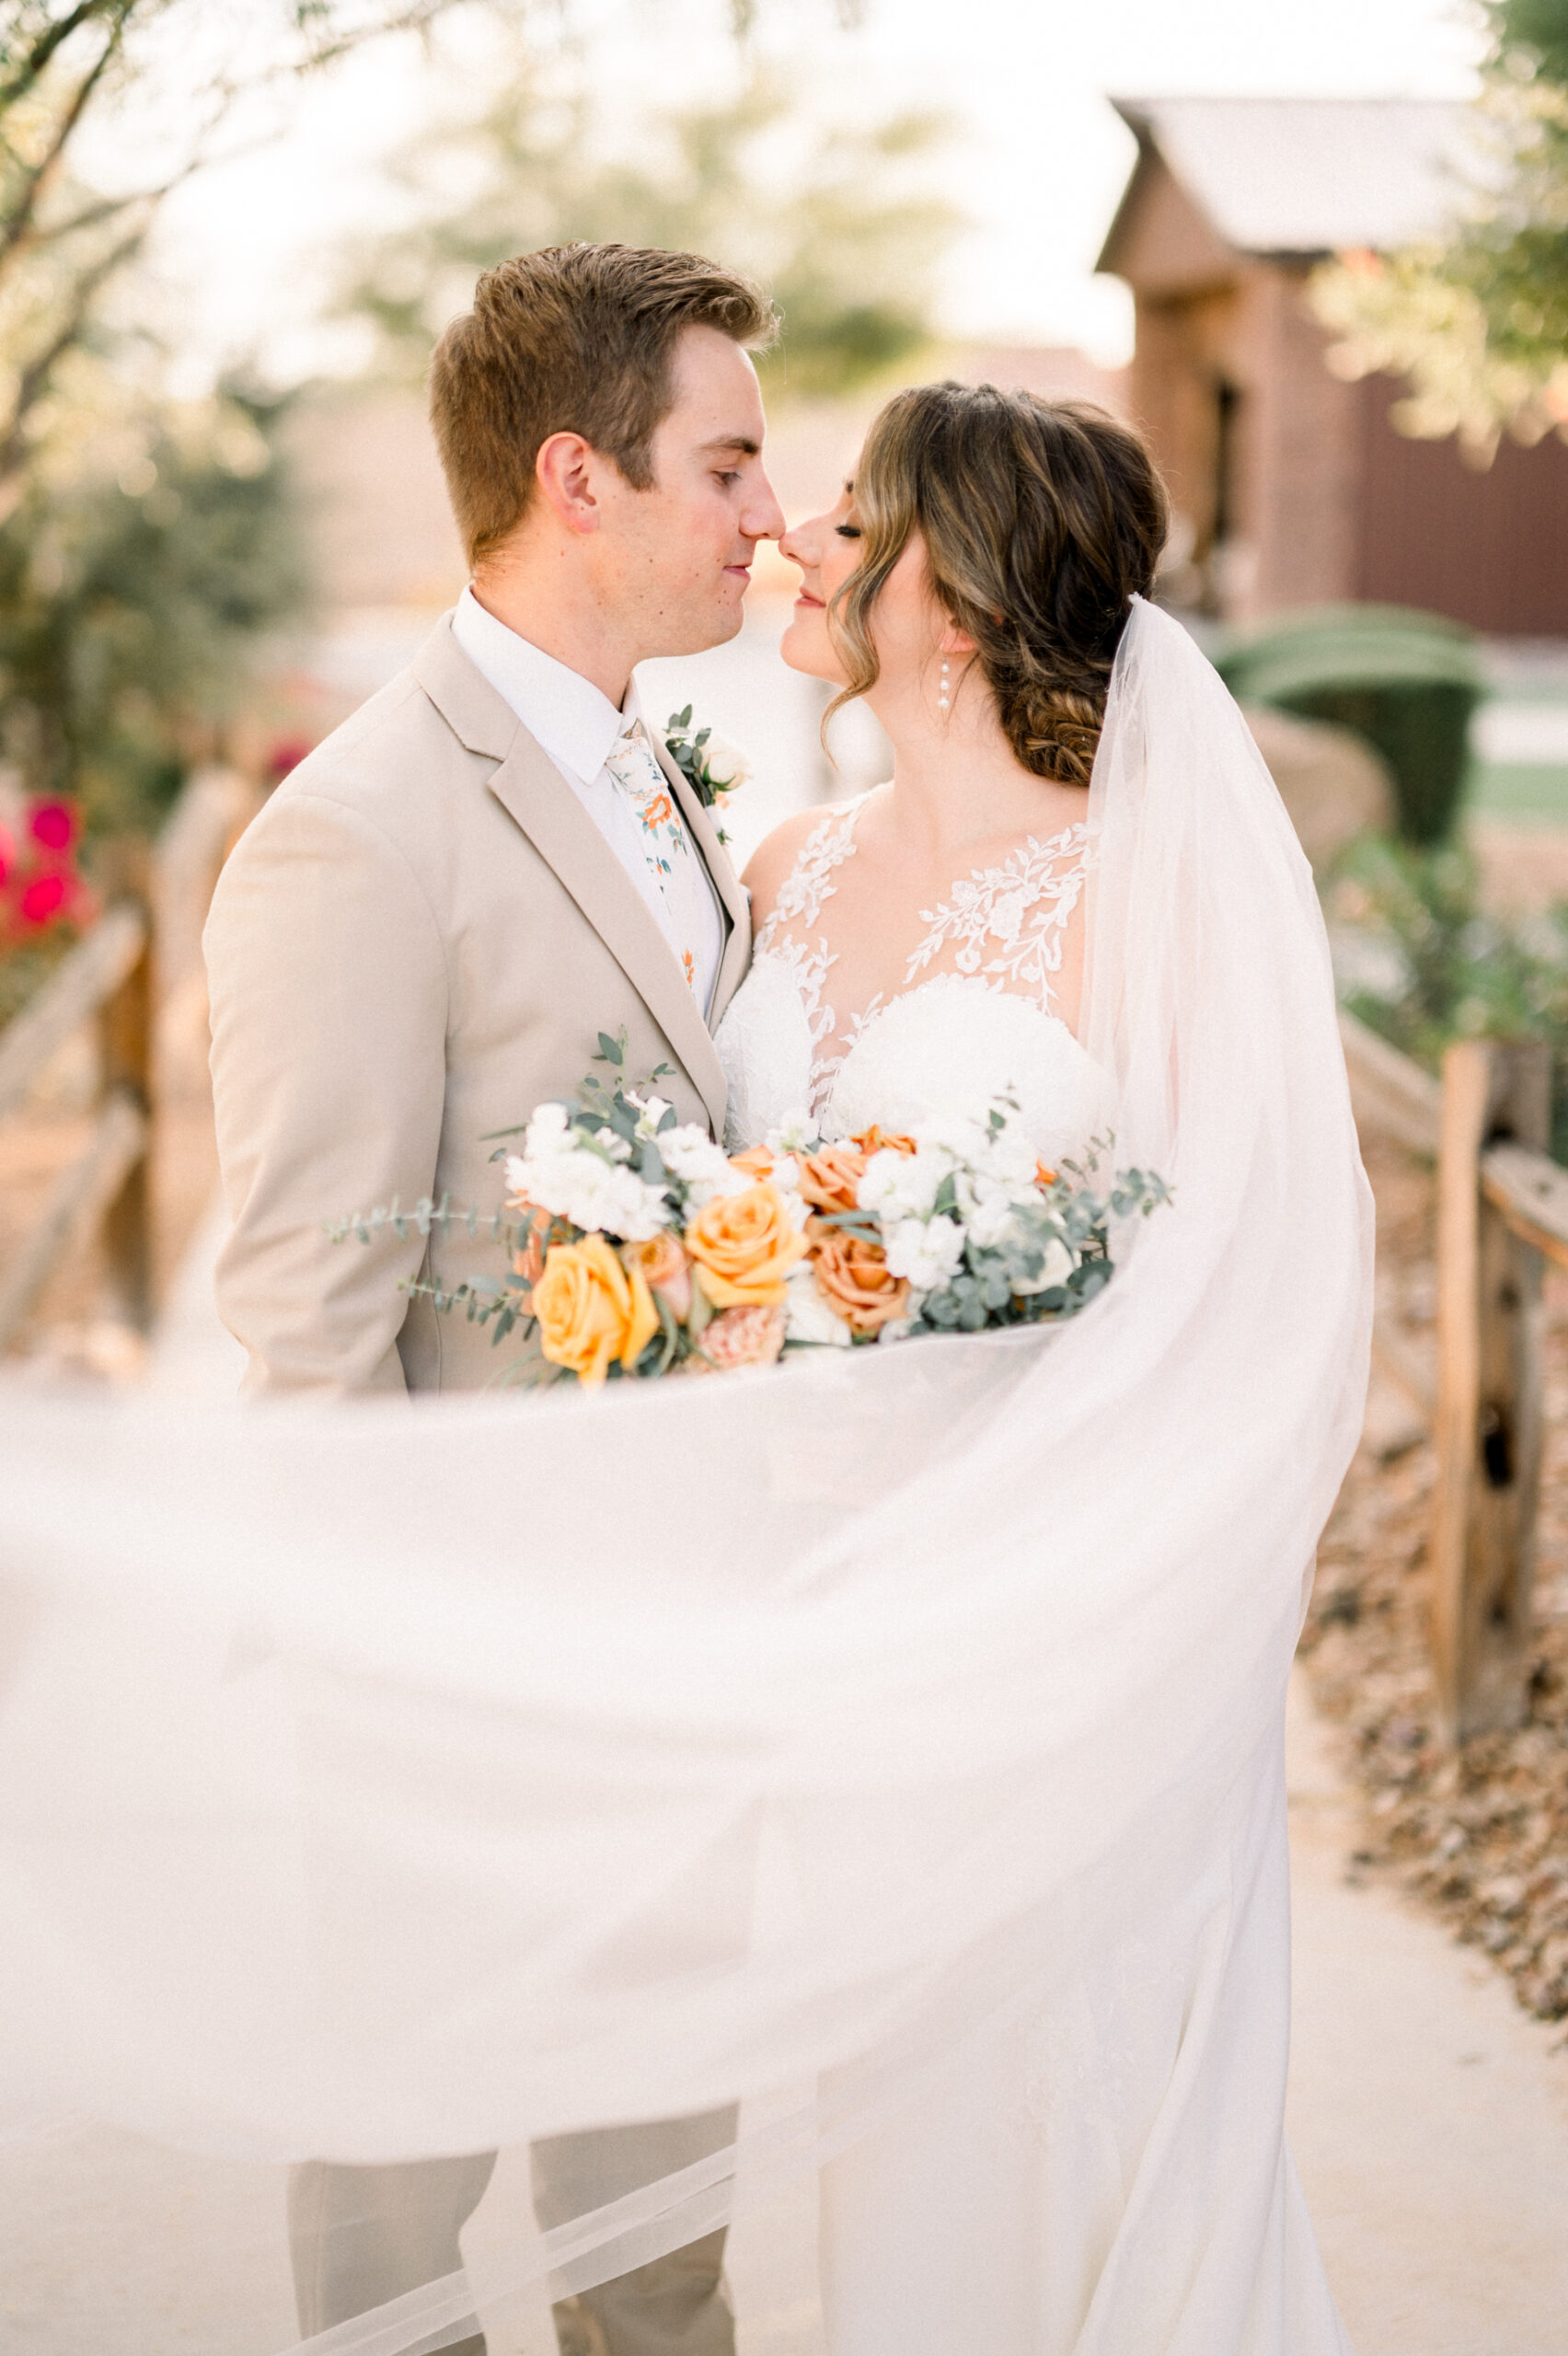 Shannon + Austin's Fall Wedding at Superstition Manor was filled with hues of orange and small hints of cacti. It was a beautiful day for a Mesa wedding!